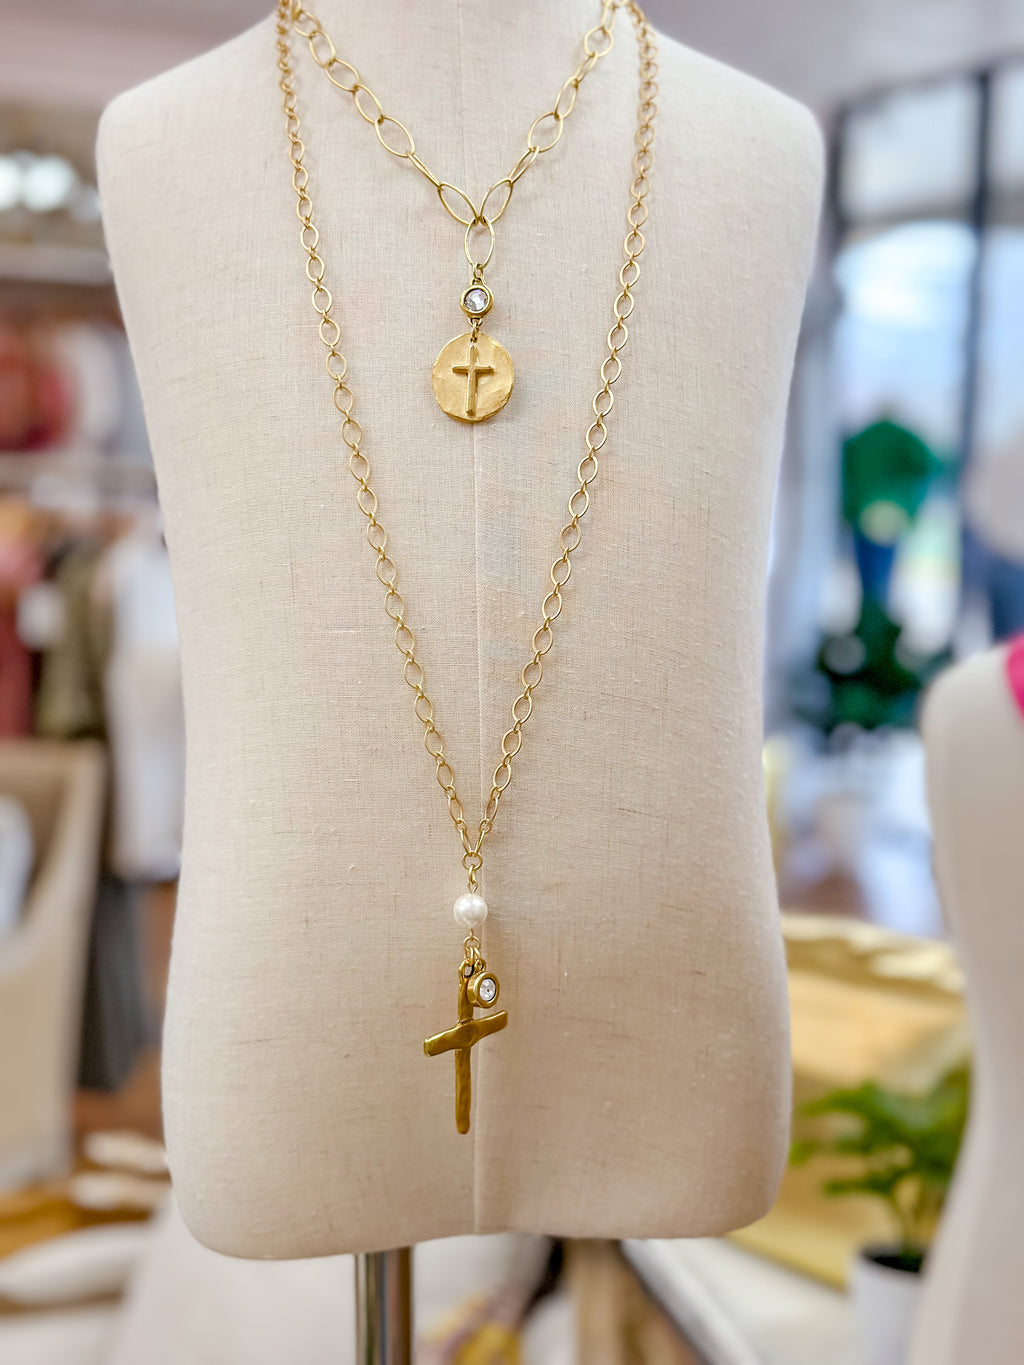 Gold necklace with CZ drop and 3D raised cross pendant- Kitzi CZ Cross Necklace